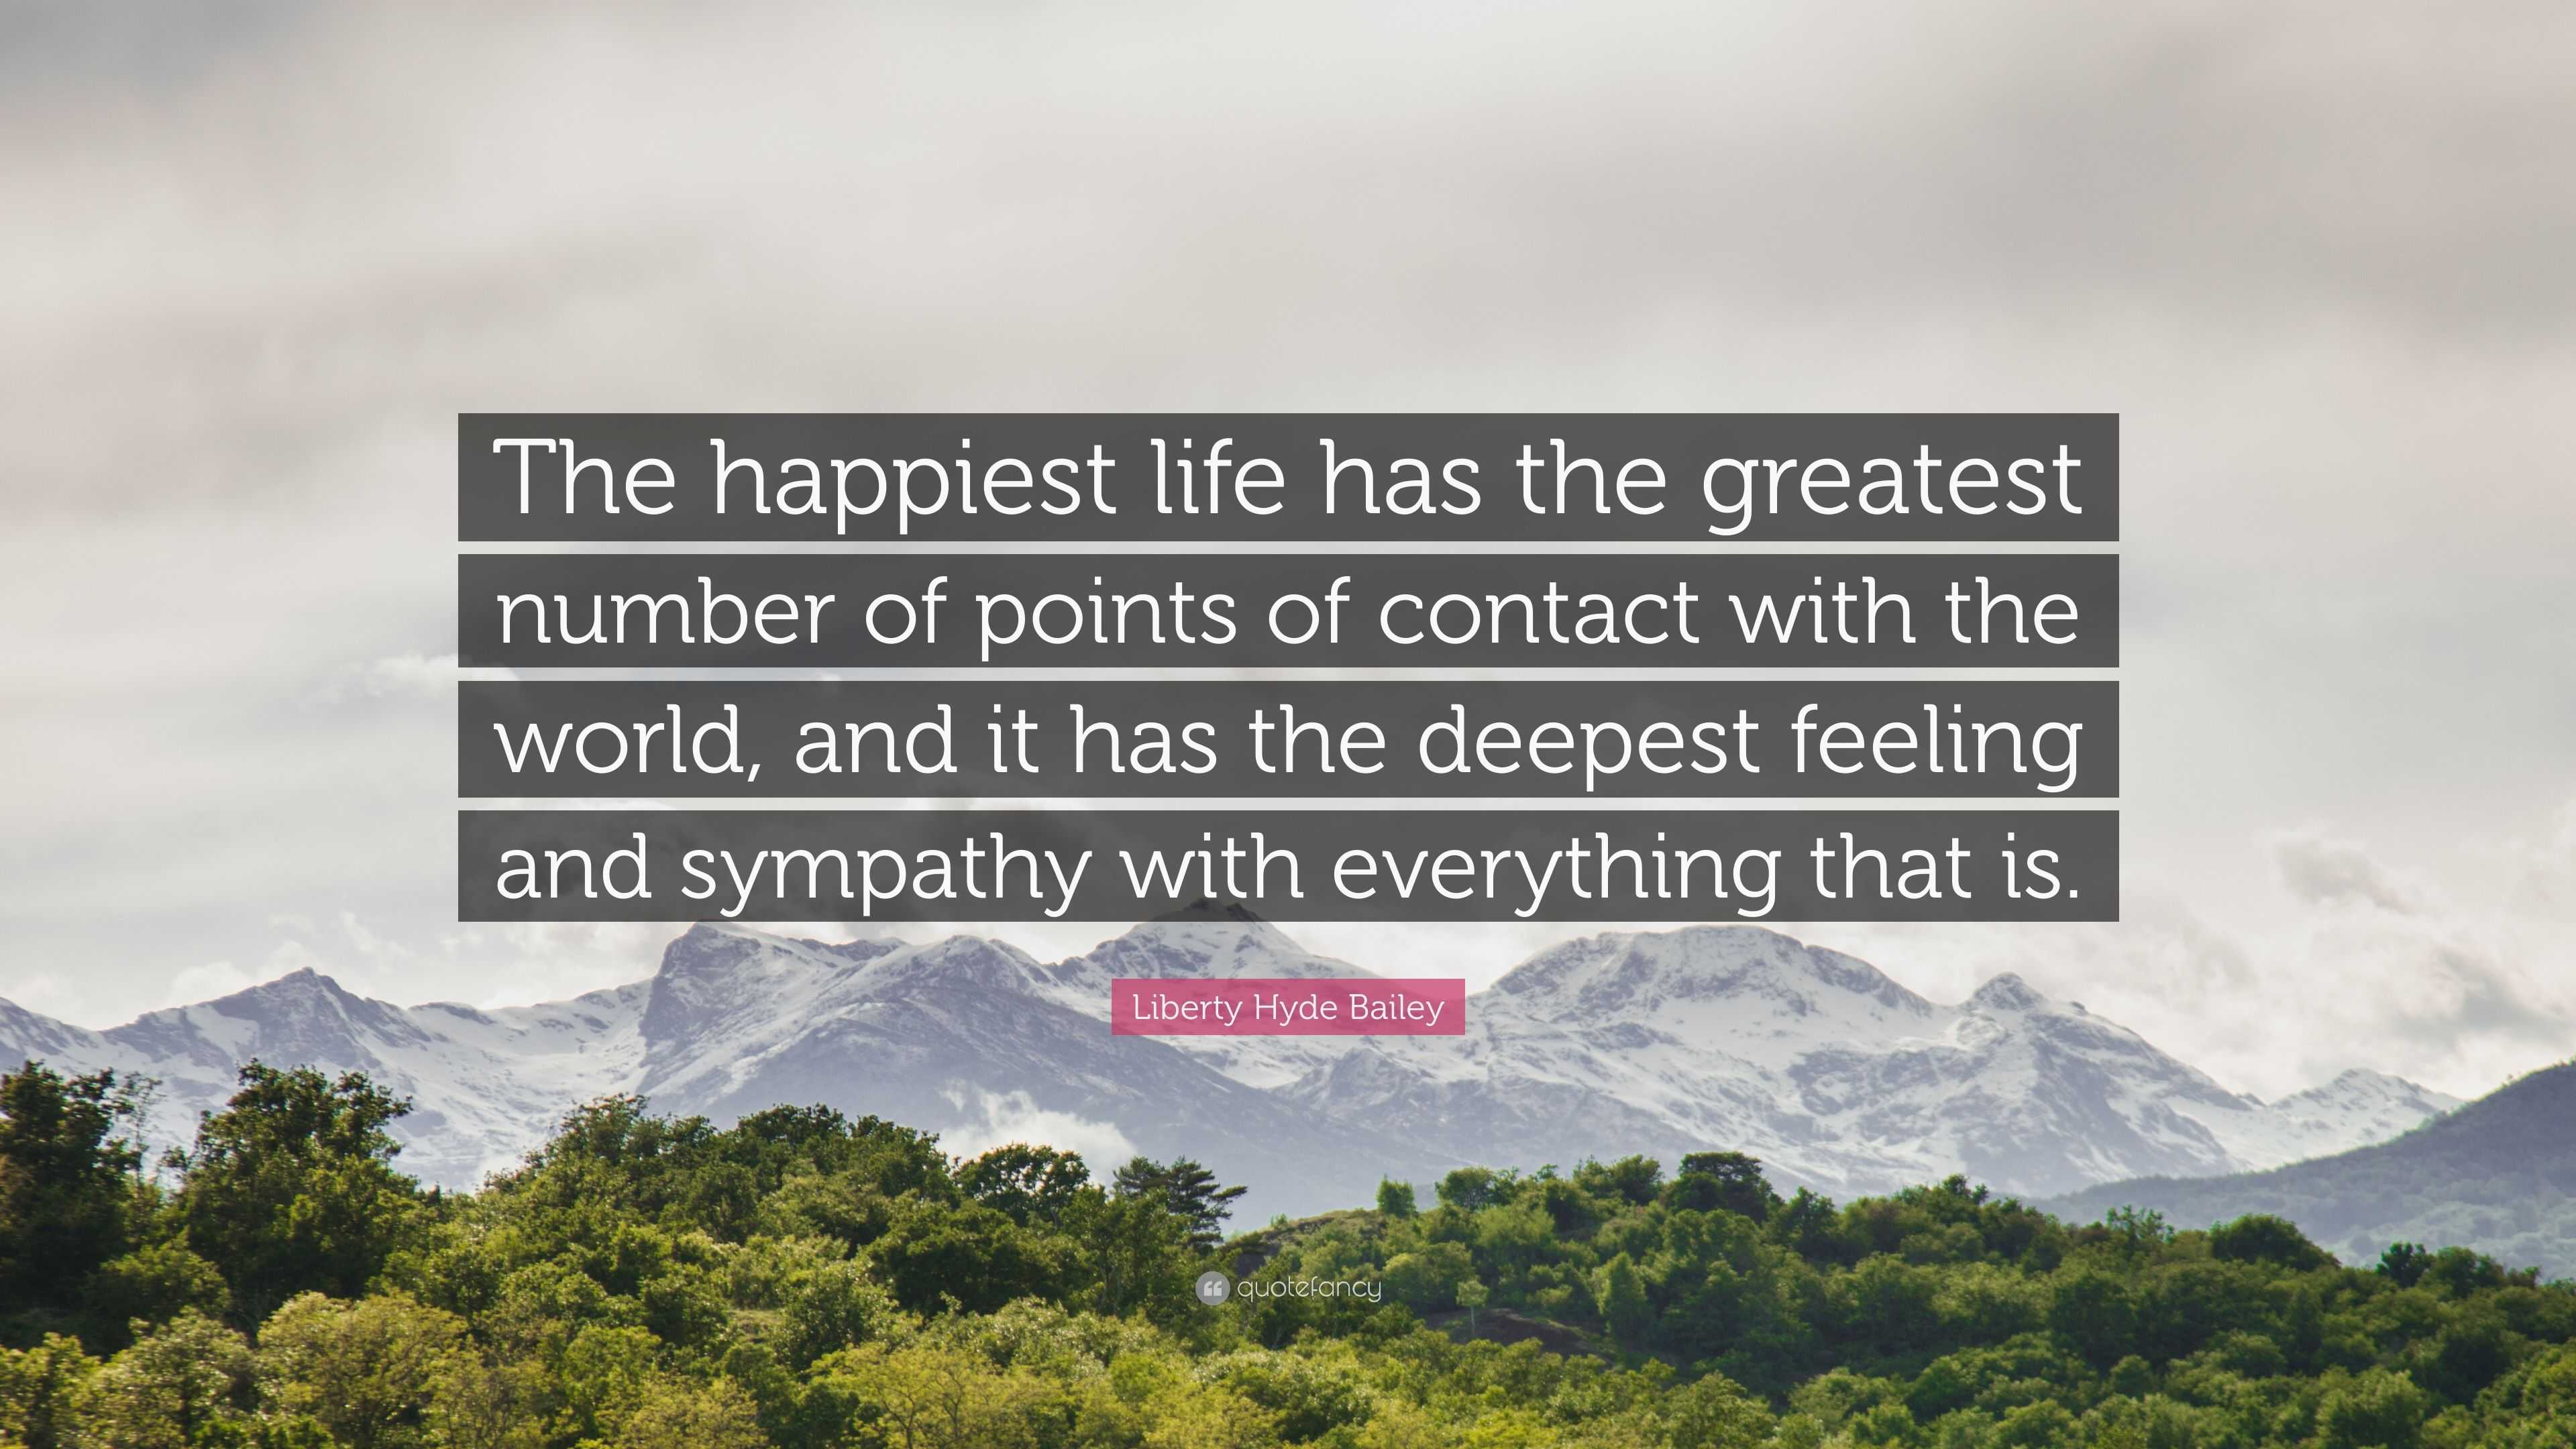 Liberty Hyde Bailey Quote: “The happiest life has the greatest number ...